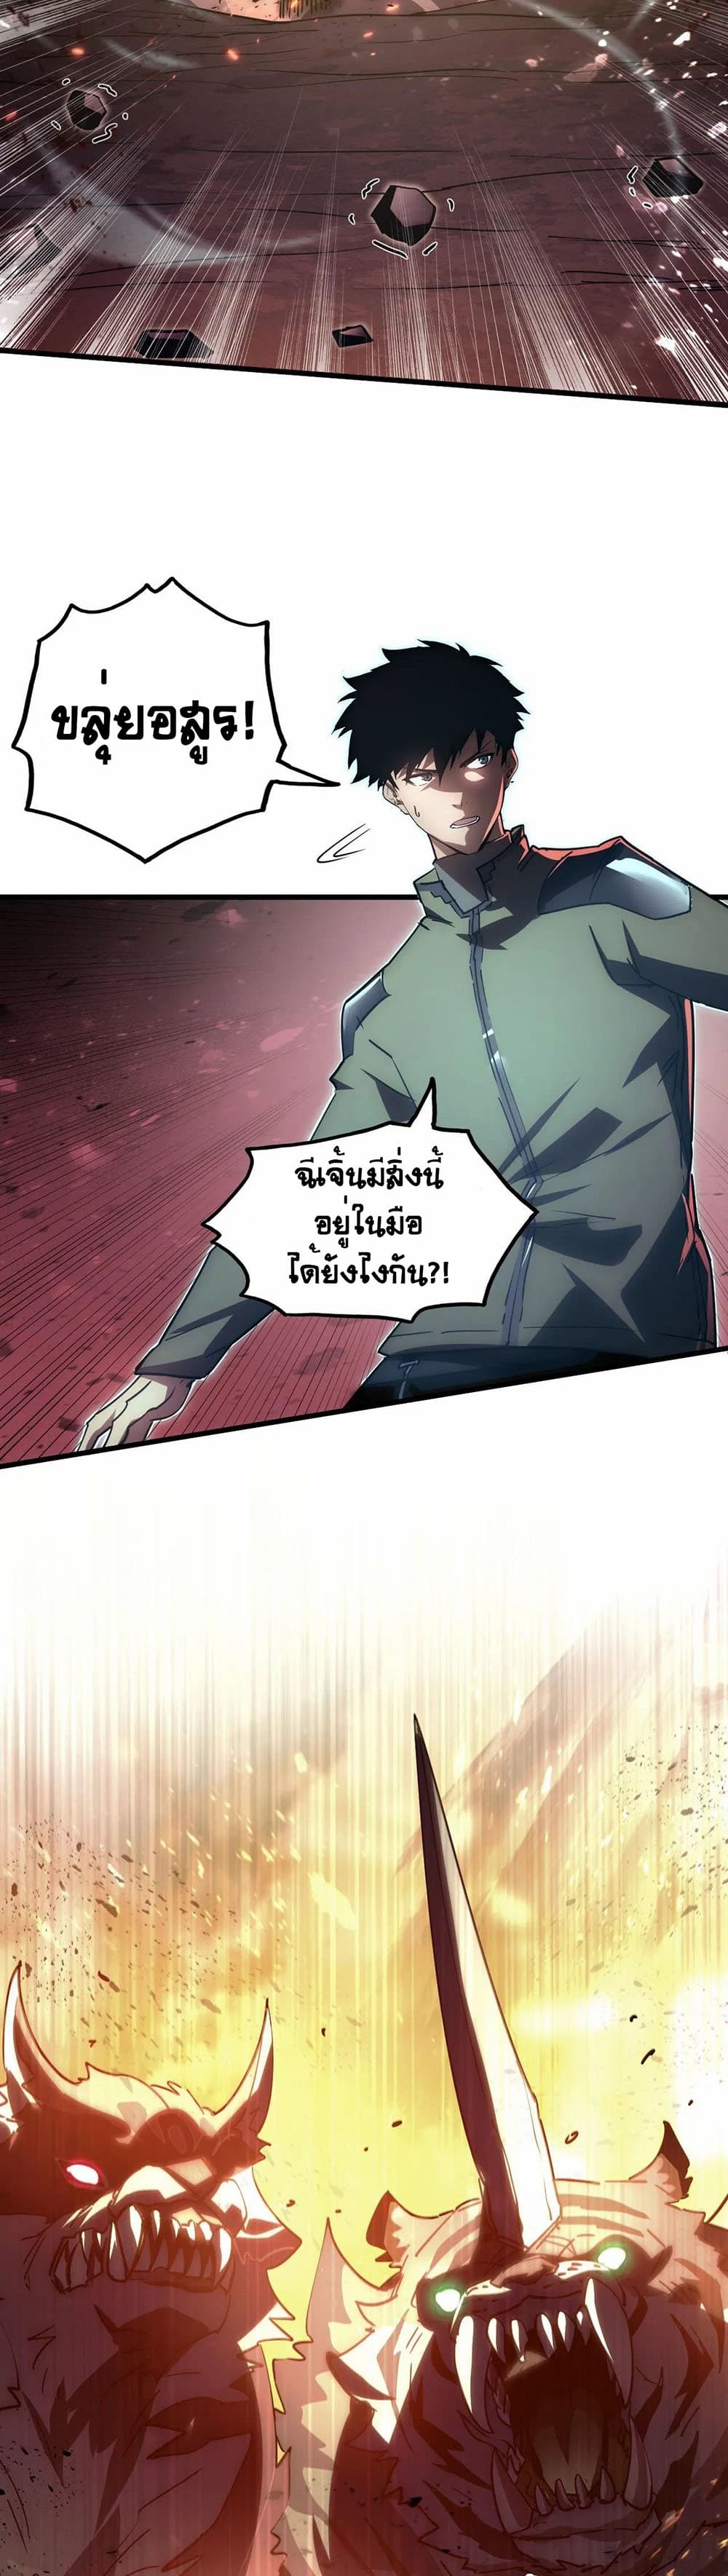 Rise From The Rubble เศษซากวันสิ้นโลก 189-189